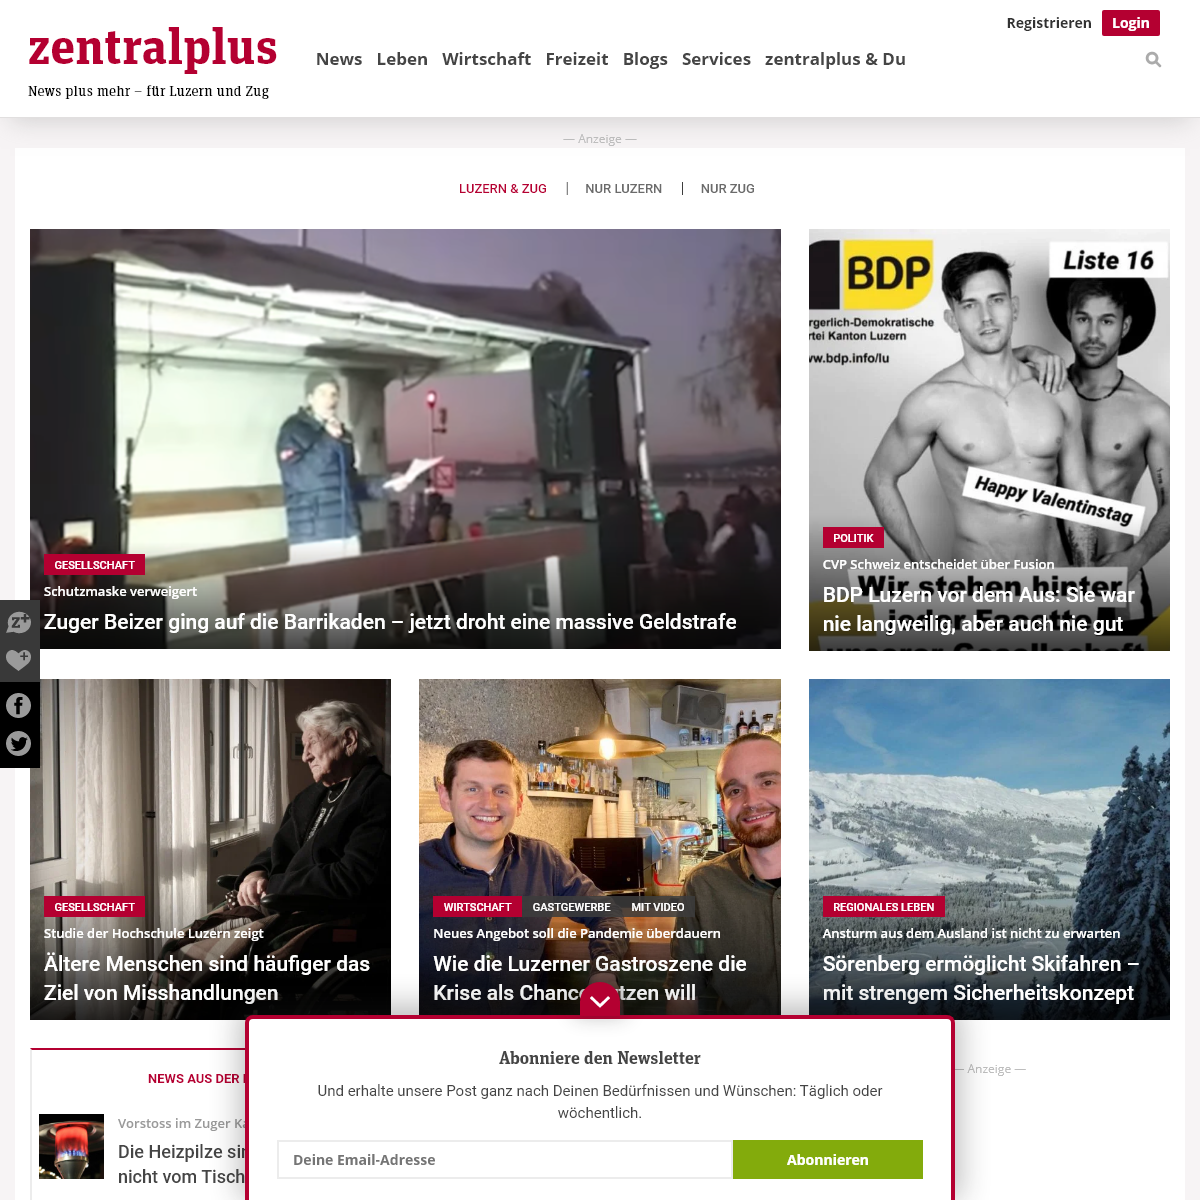 A complete backup of zentralplus.ch